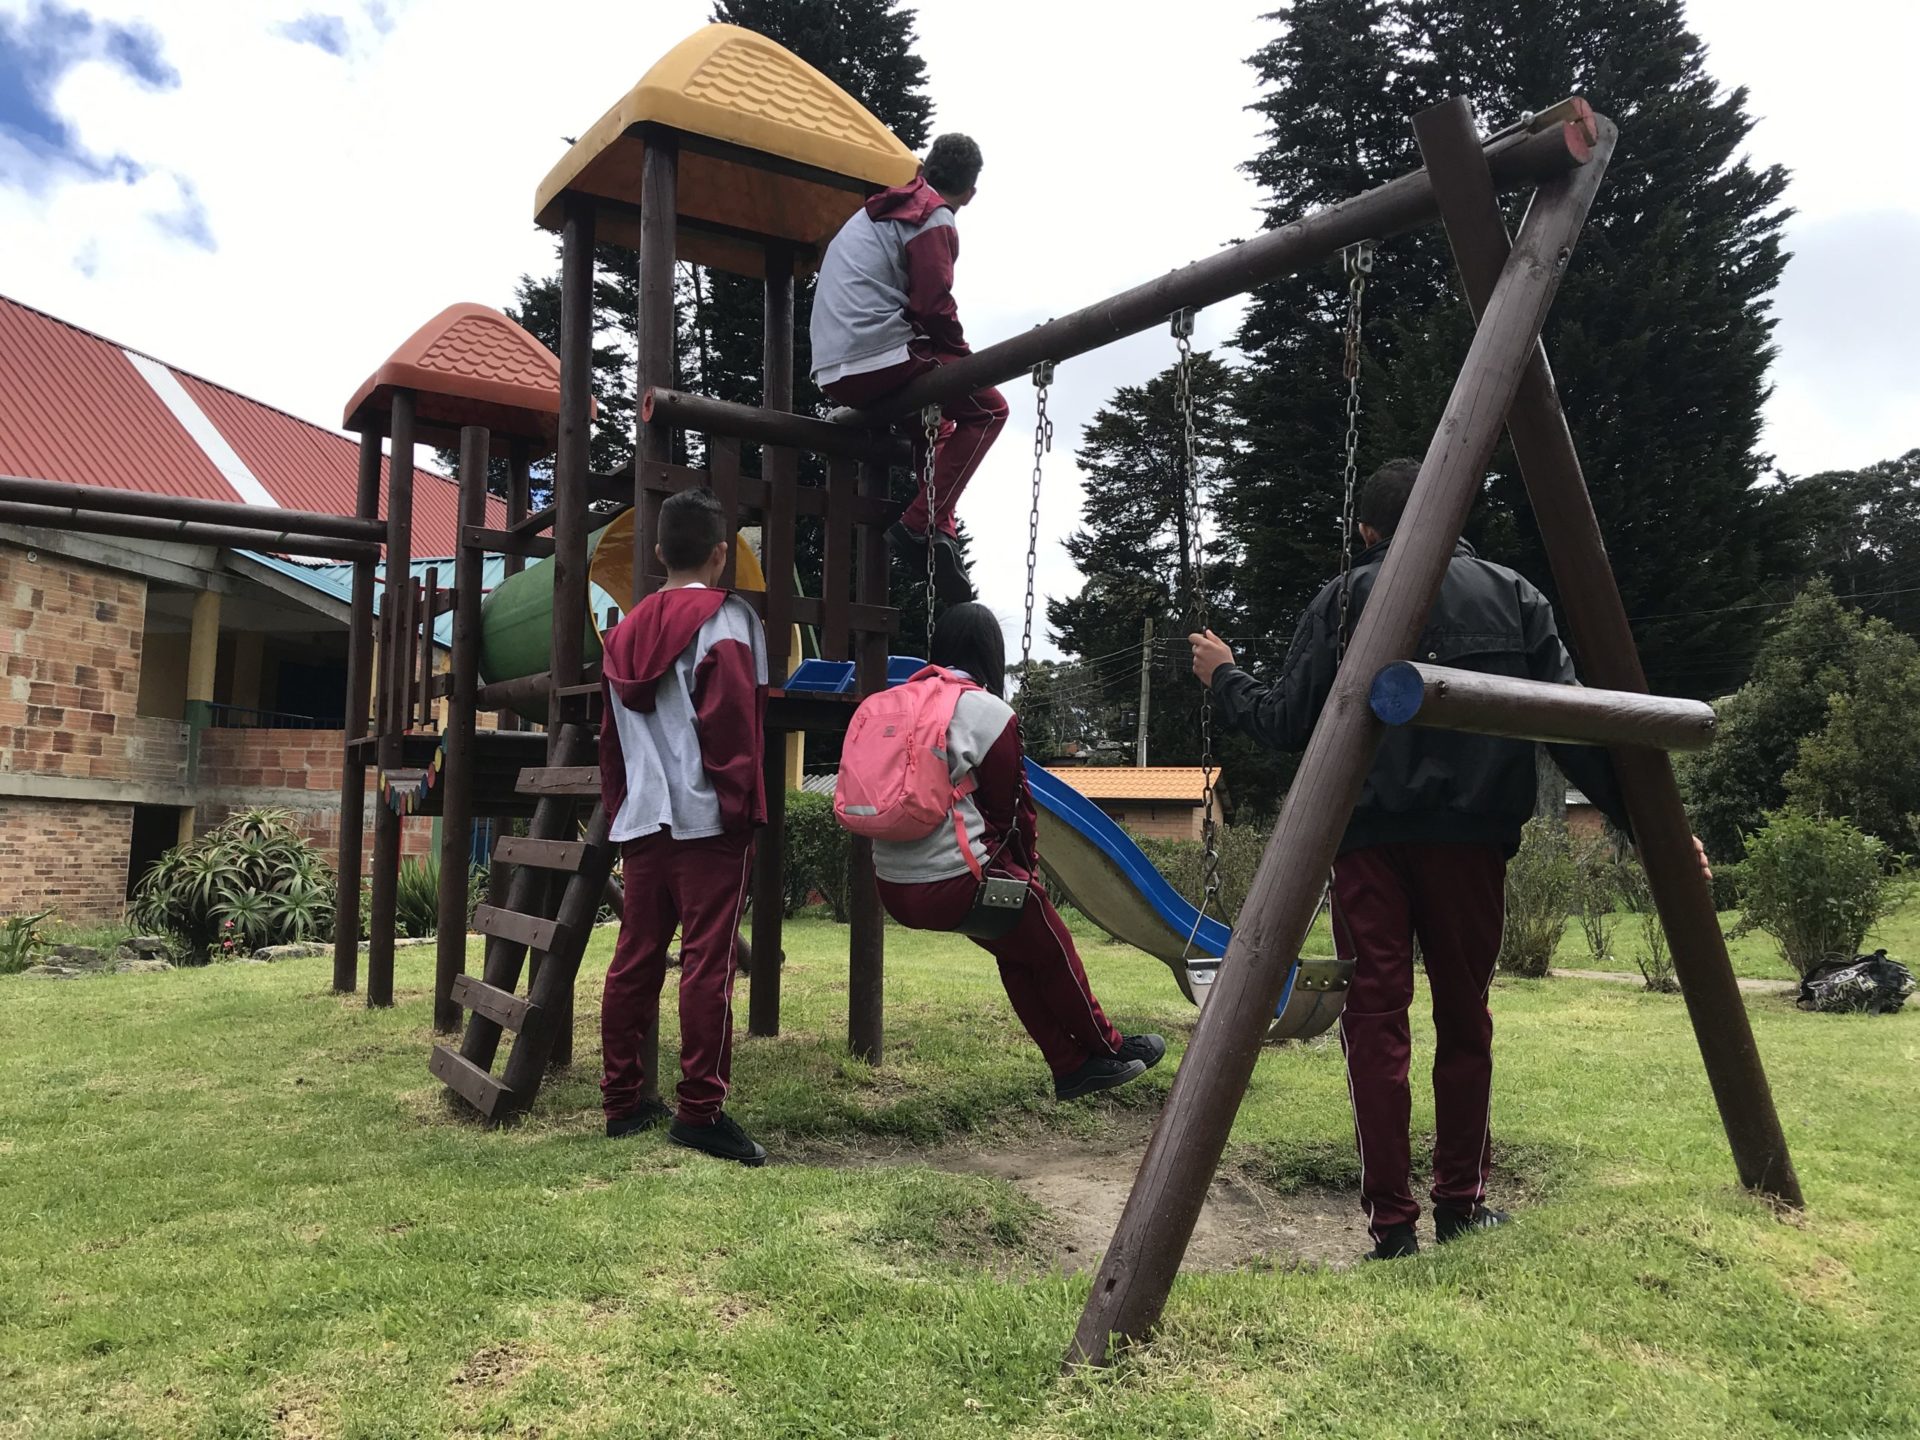 Former child combatants at the playground at Benposta, a refuge for child survivors of conflict and a project partner.